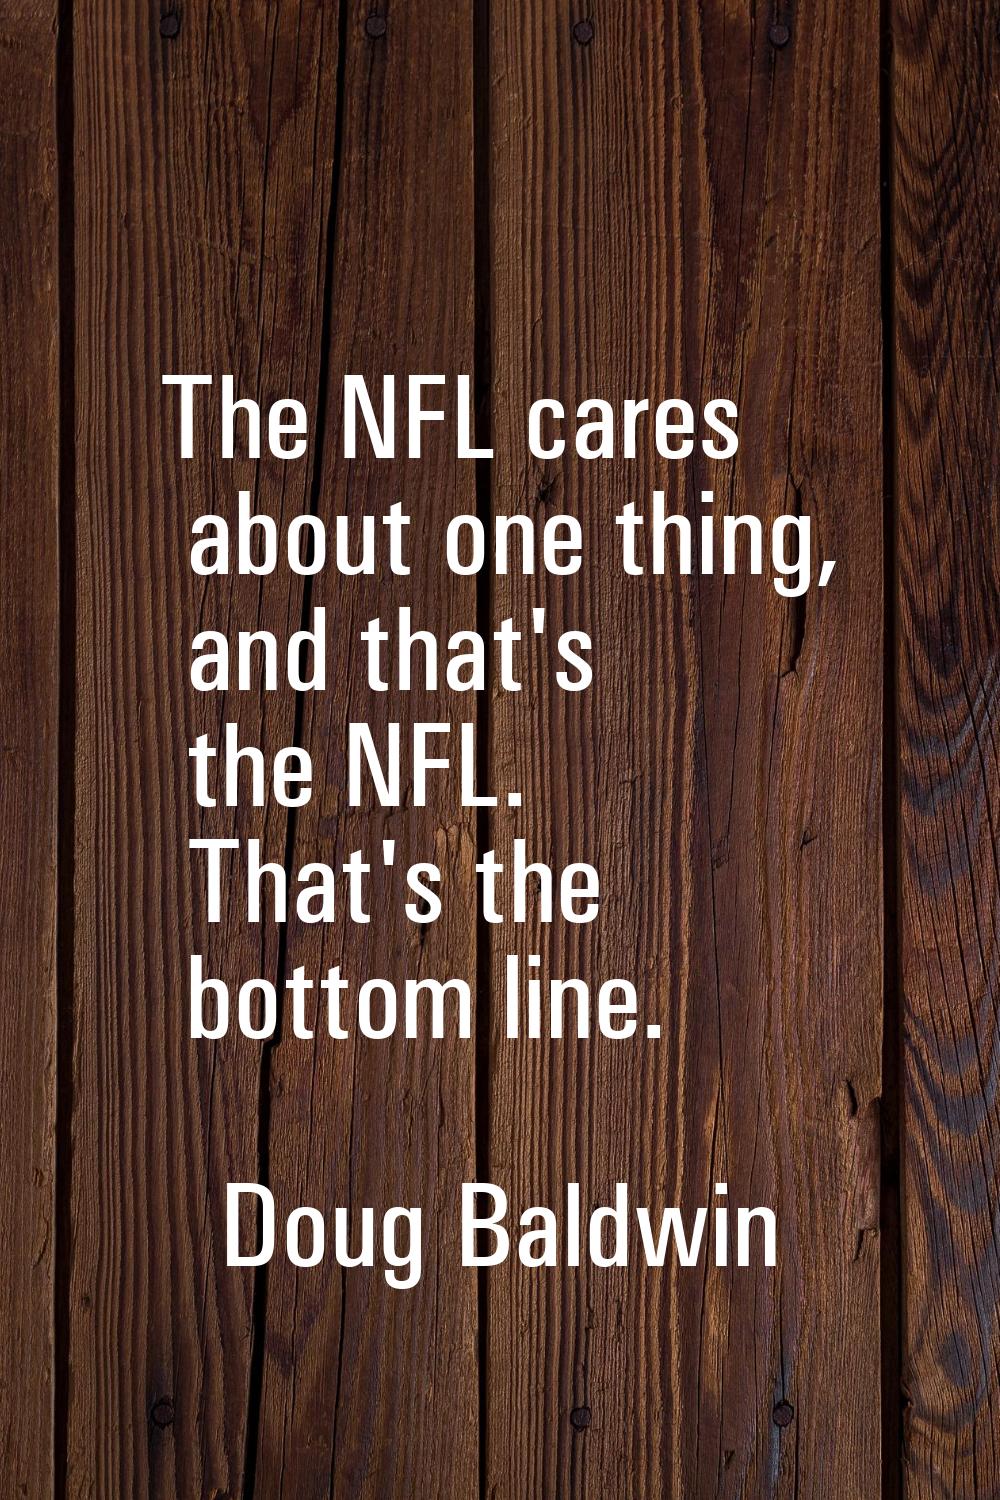 The NFL cares about one thing, and that's the NFL. That's the bottom line.